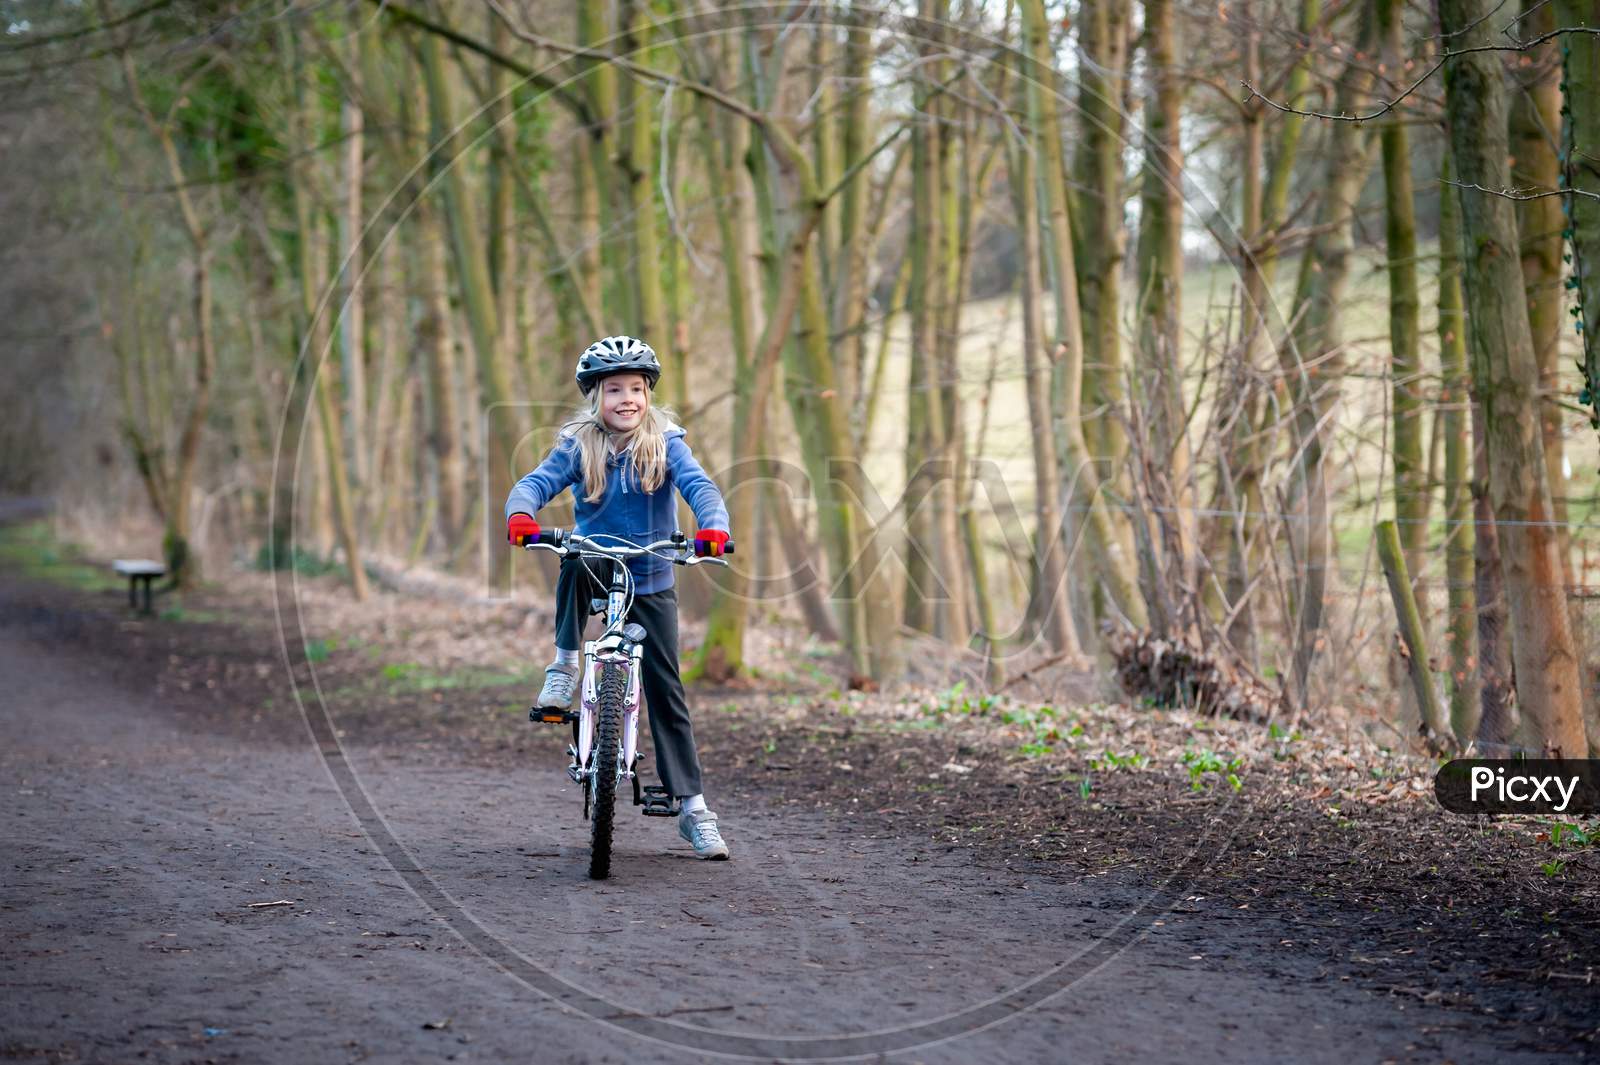 Smiling, Happy Young Blonde Girl Paused On Her Bike On A Country Path